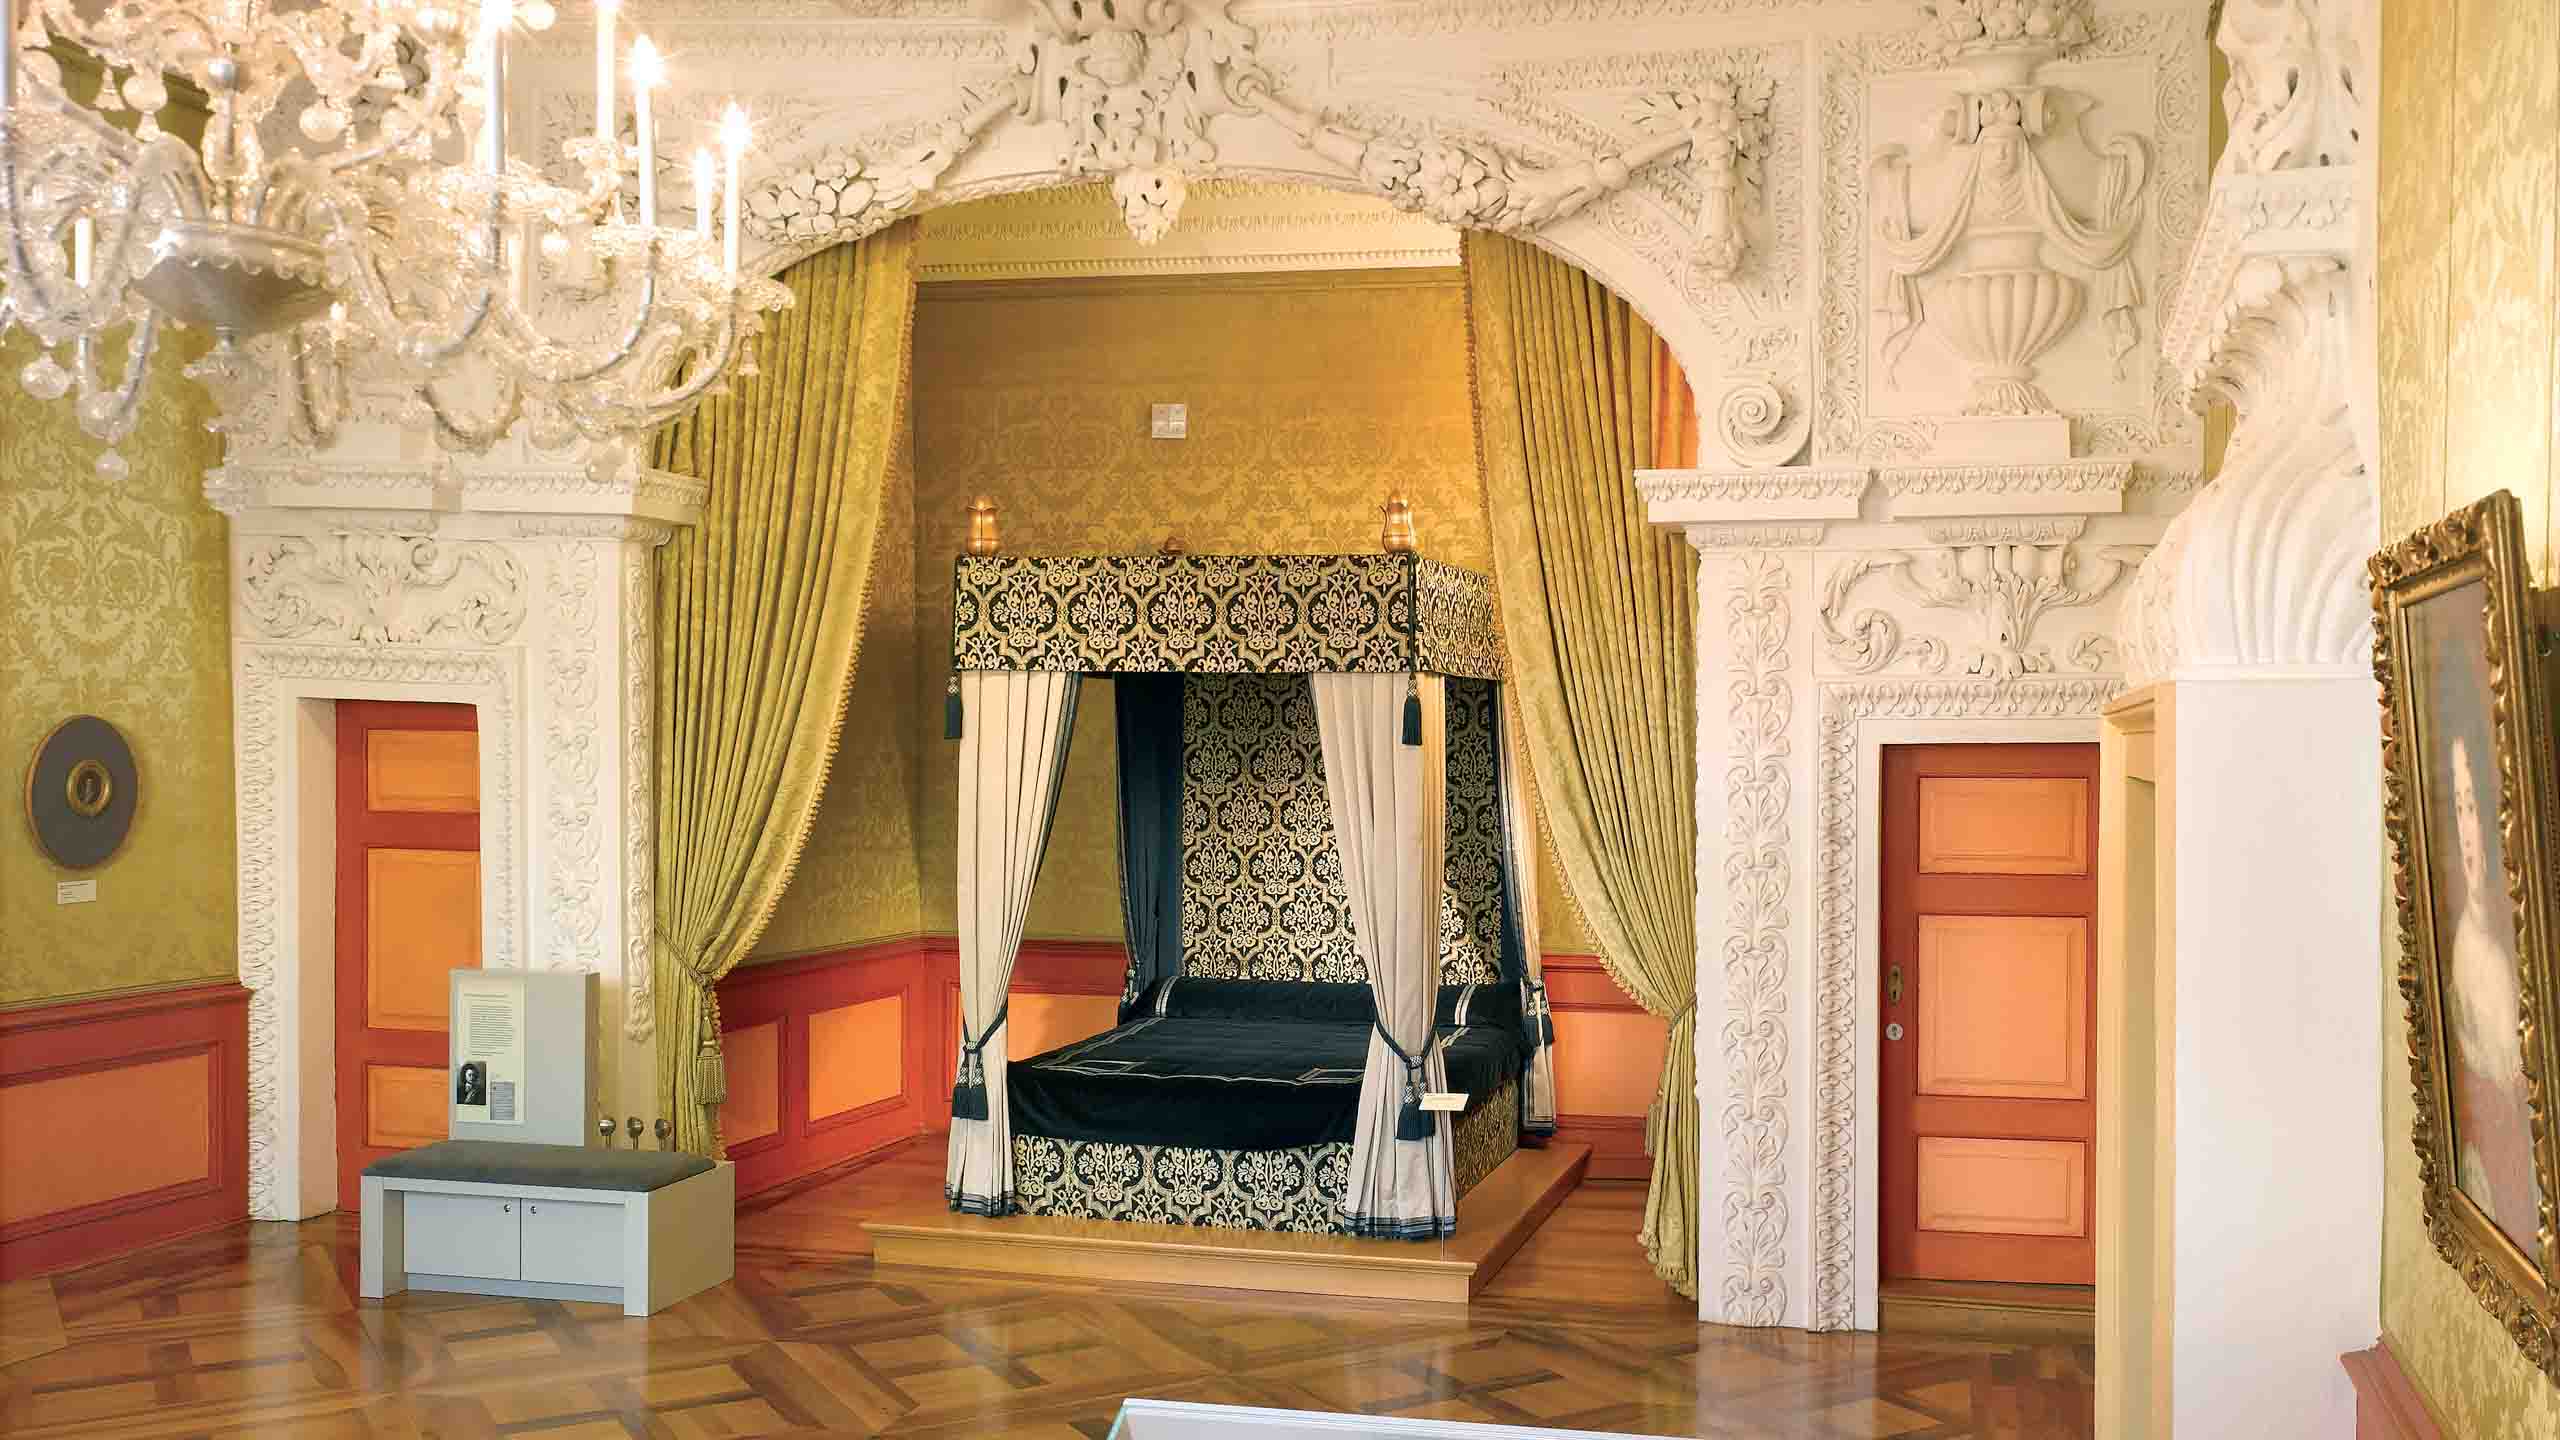 Celle Palace, Parade Room in the Residence Museum